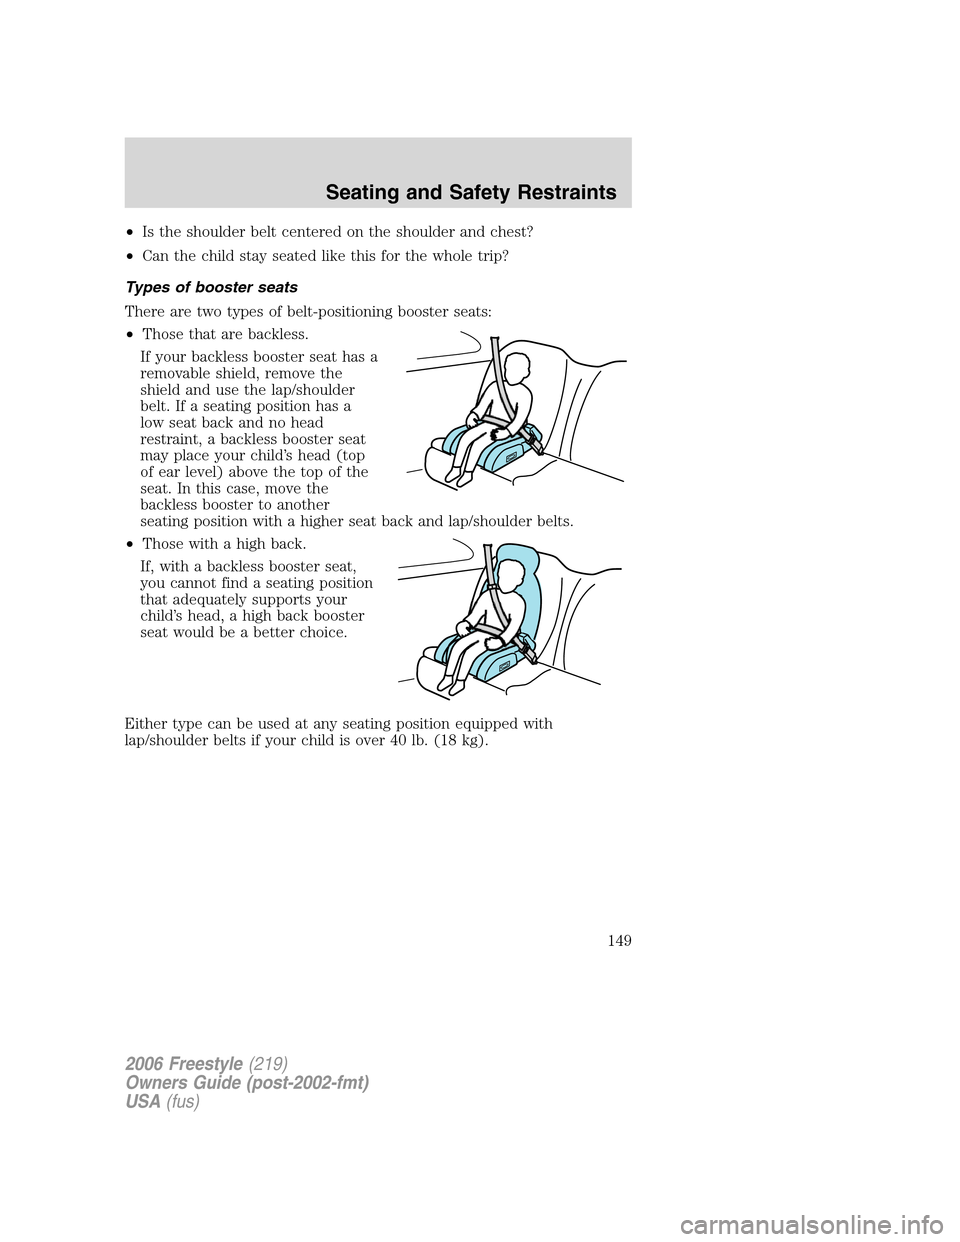 FORD FREESTYLE 2006 1.G User Guide •Is the shoulder belt centered on the shoulder and chest?
•Can the child stay seated like this for the whole trip?
Types of booster seats
There are two types of belt-positioning booster seats:
•